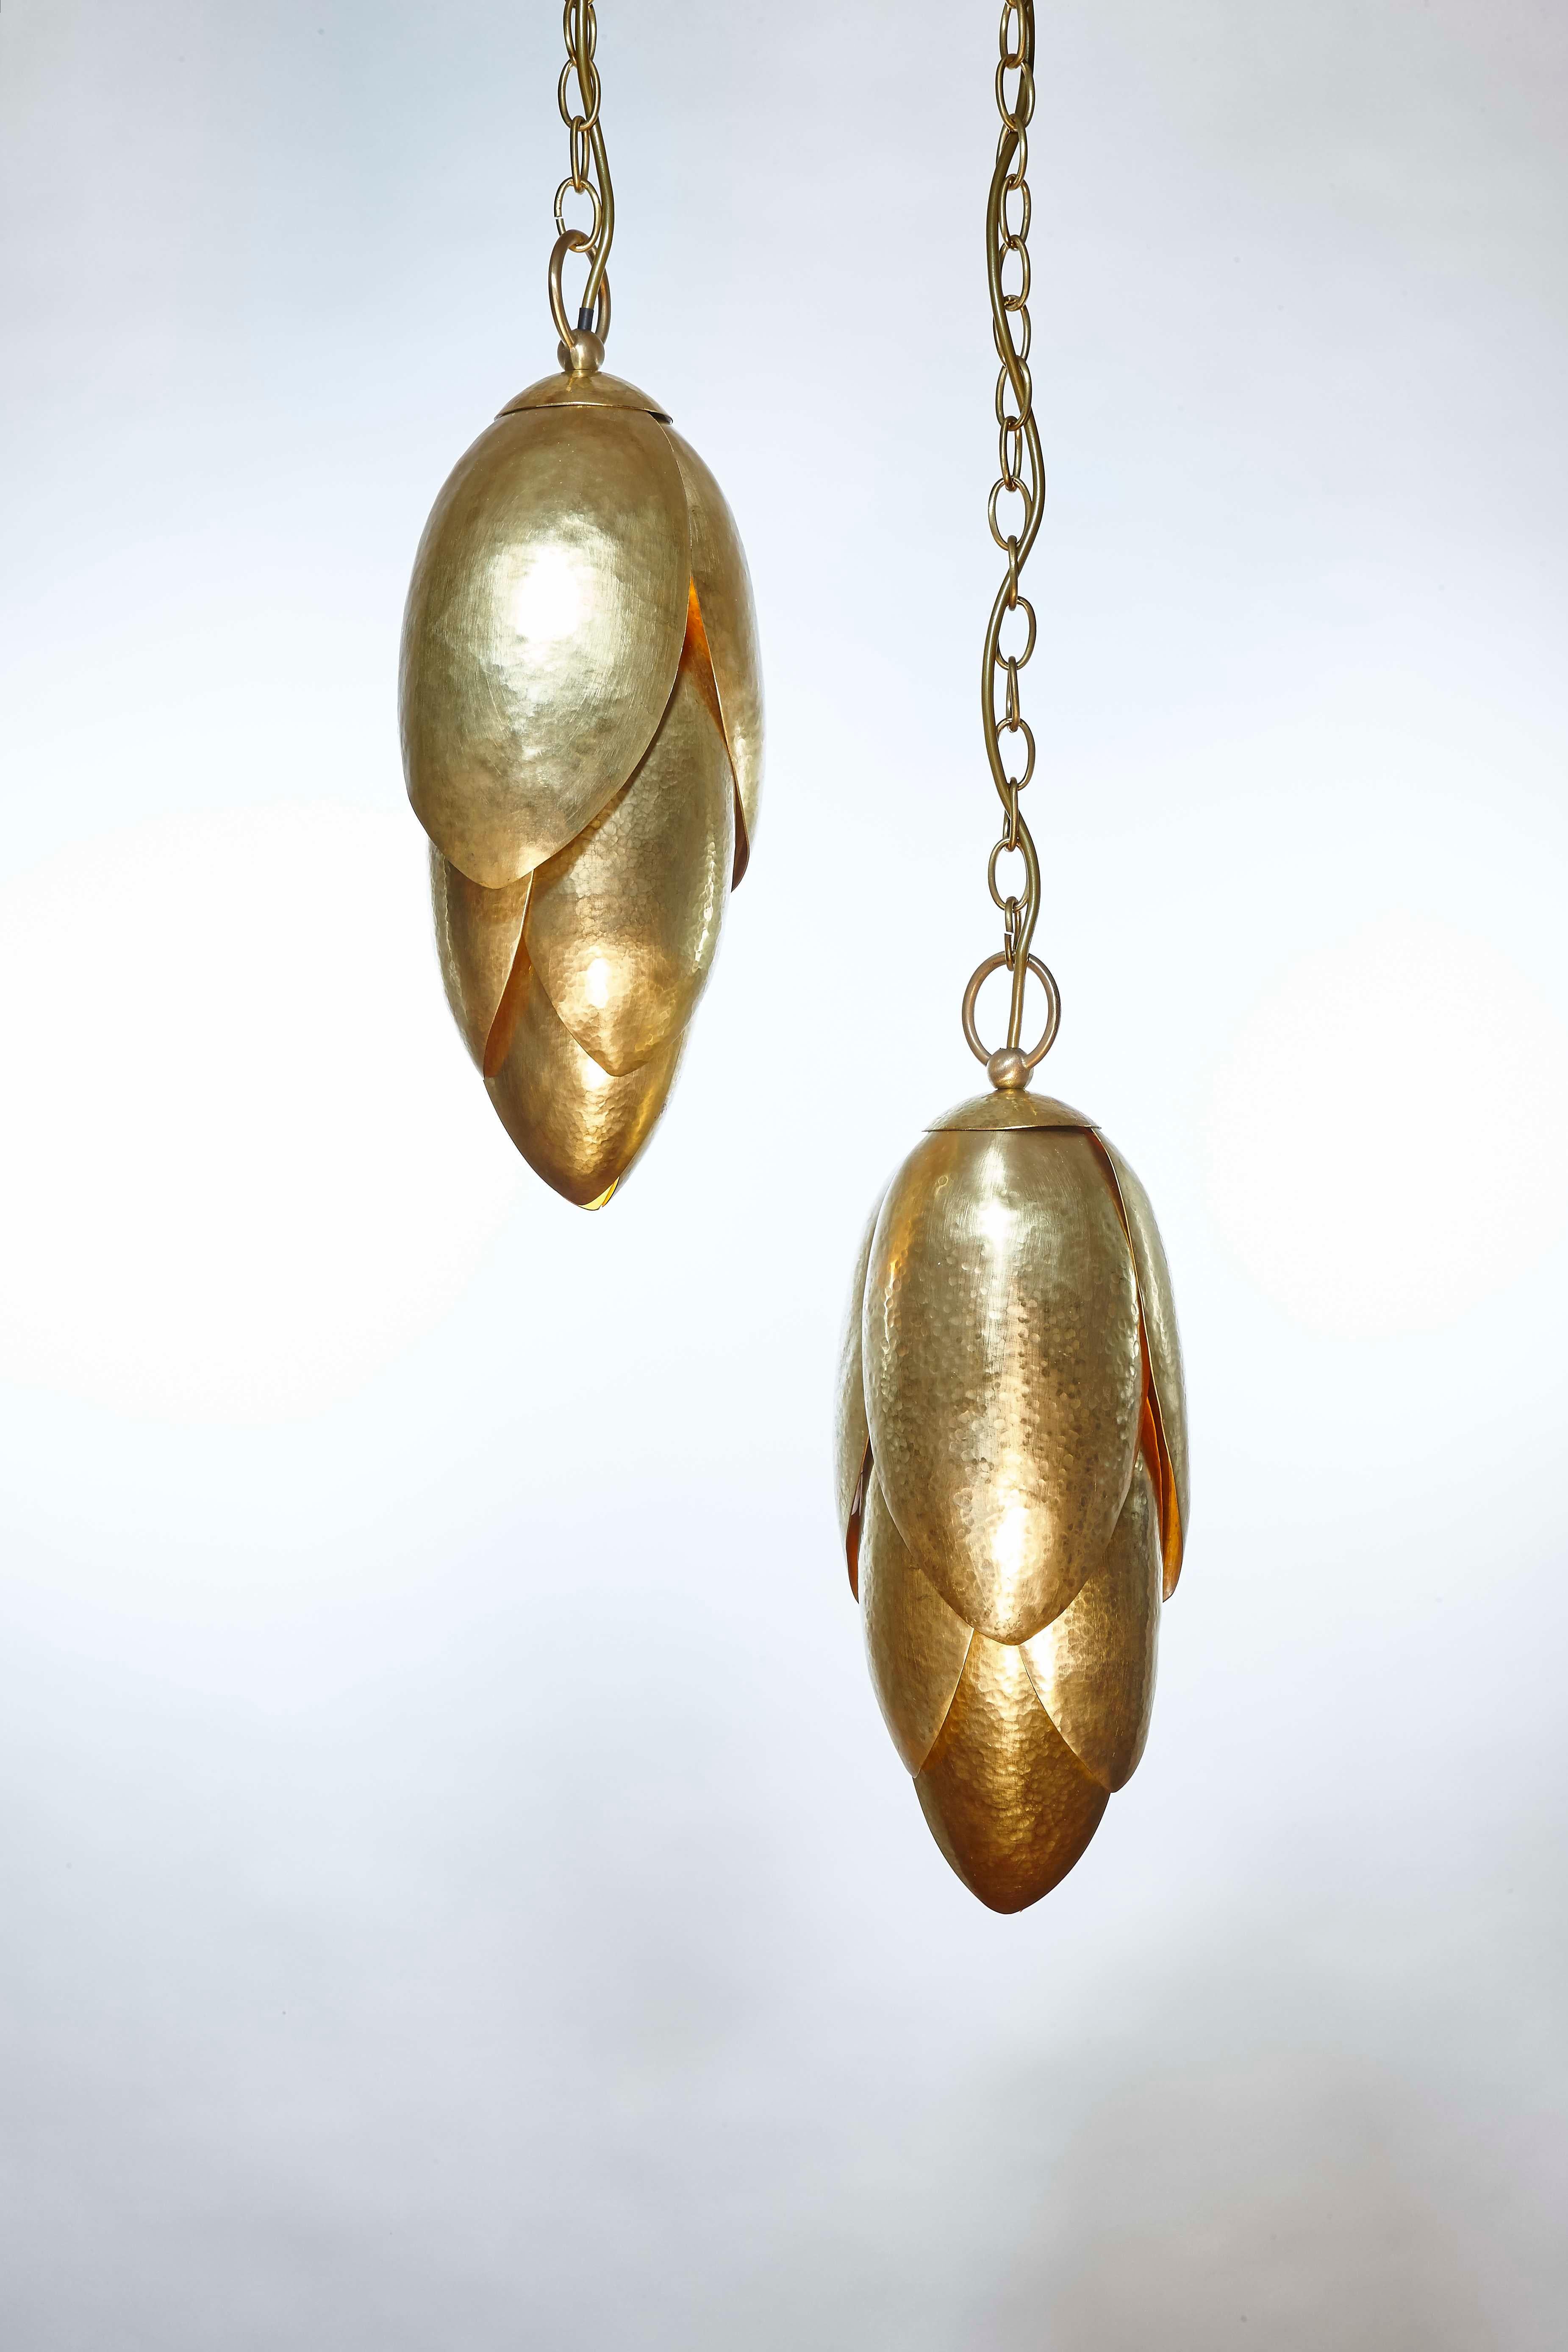 The design inspiration for these beautiful pendants was taken from the petals of the lotus flower, symbolising purity, strength and resilience. Each petal is carefully hand-hammered in bronze. The perfect statement piece over a staircase, above a